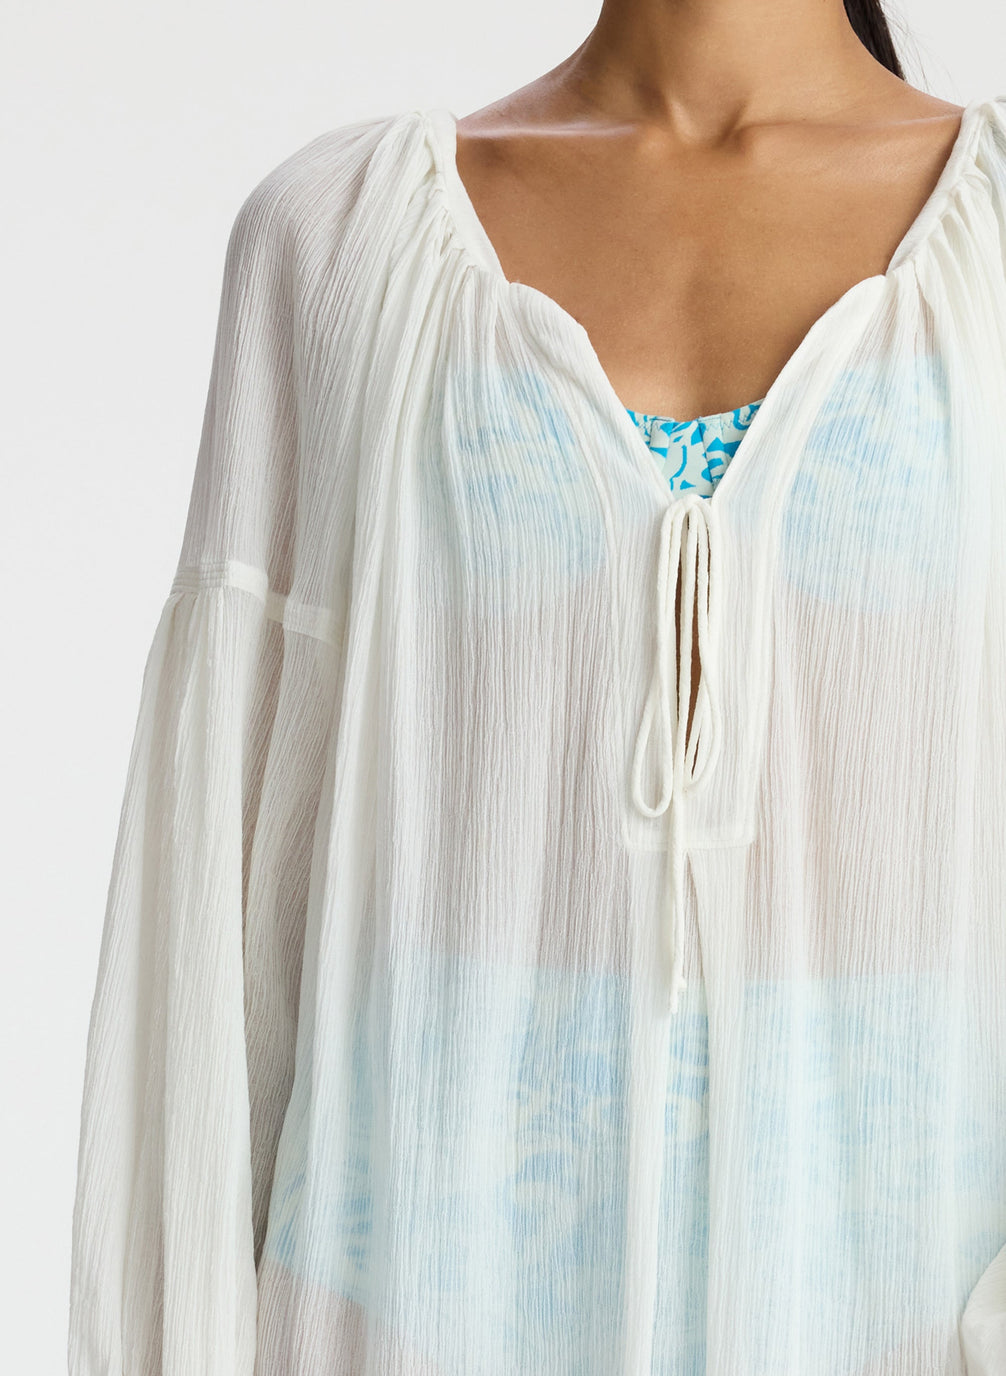 detail view of woman wearing white sheer swim cover up dress